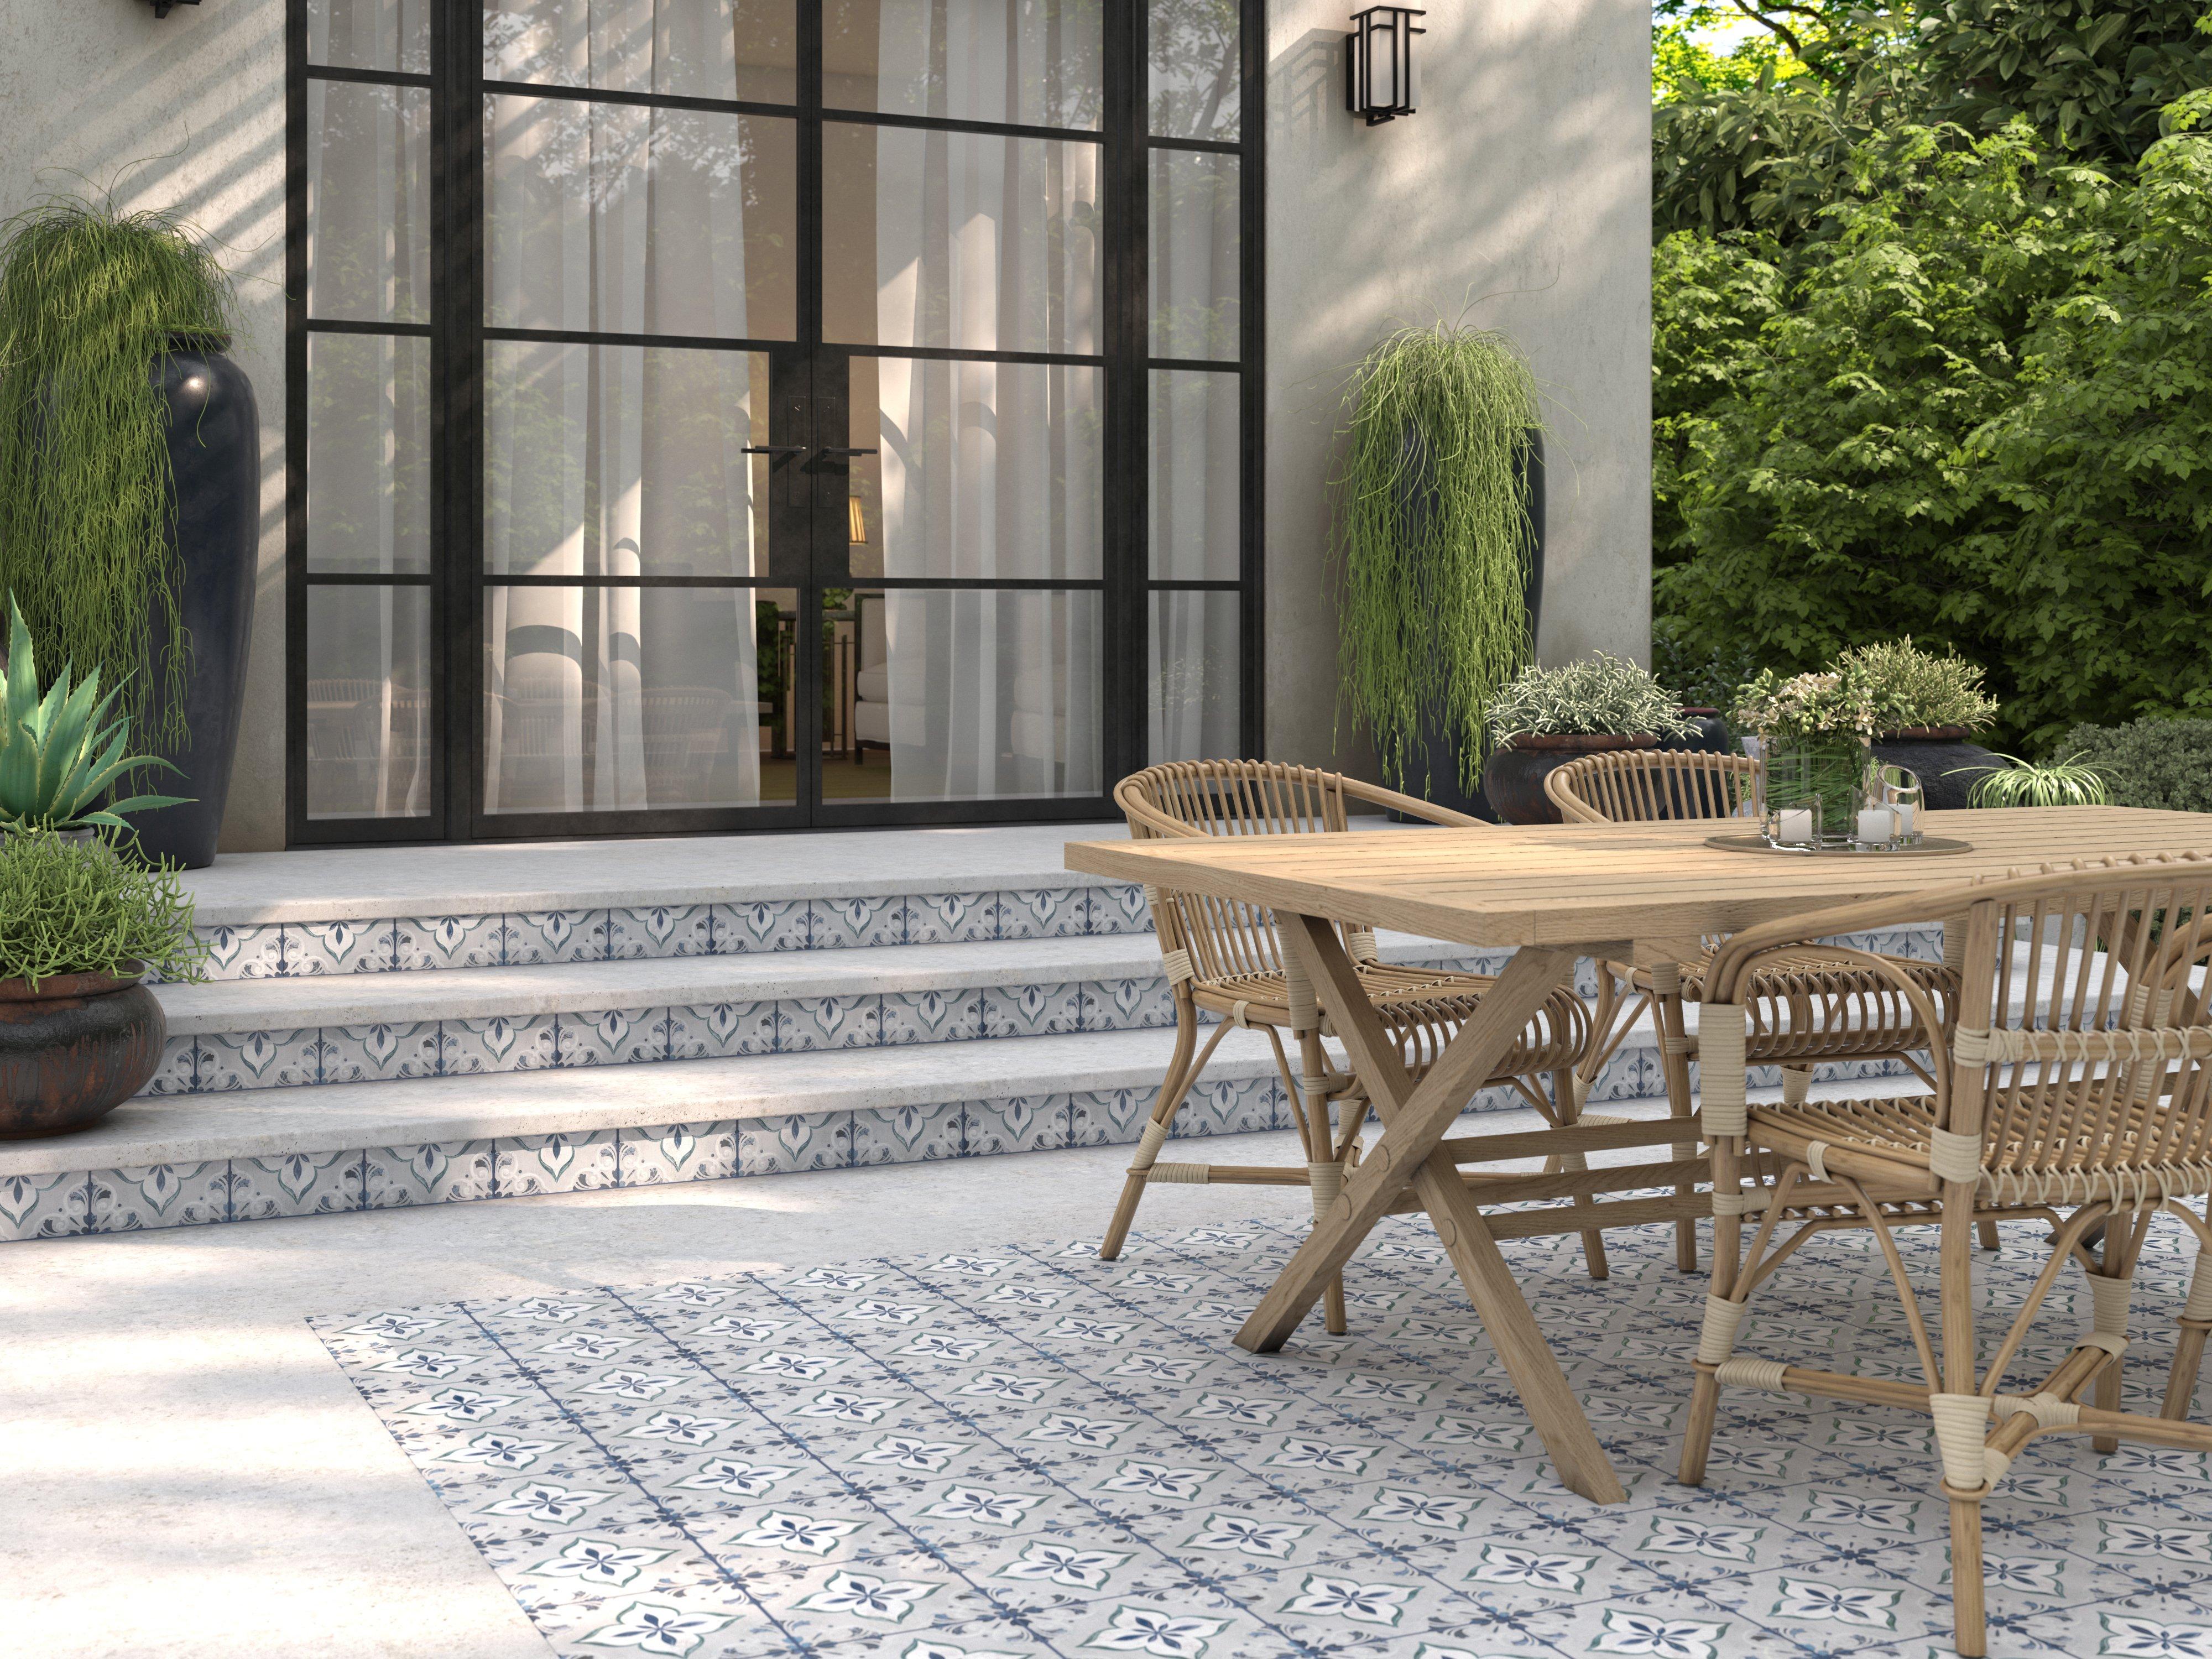 Terrace Spanish Tile Silver/Grey Outdoor Rug by Rug Style